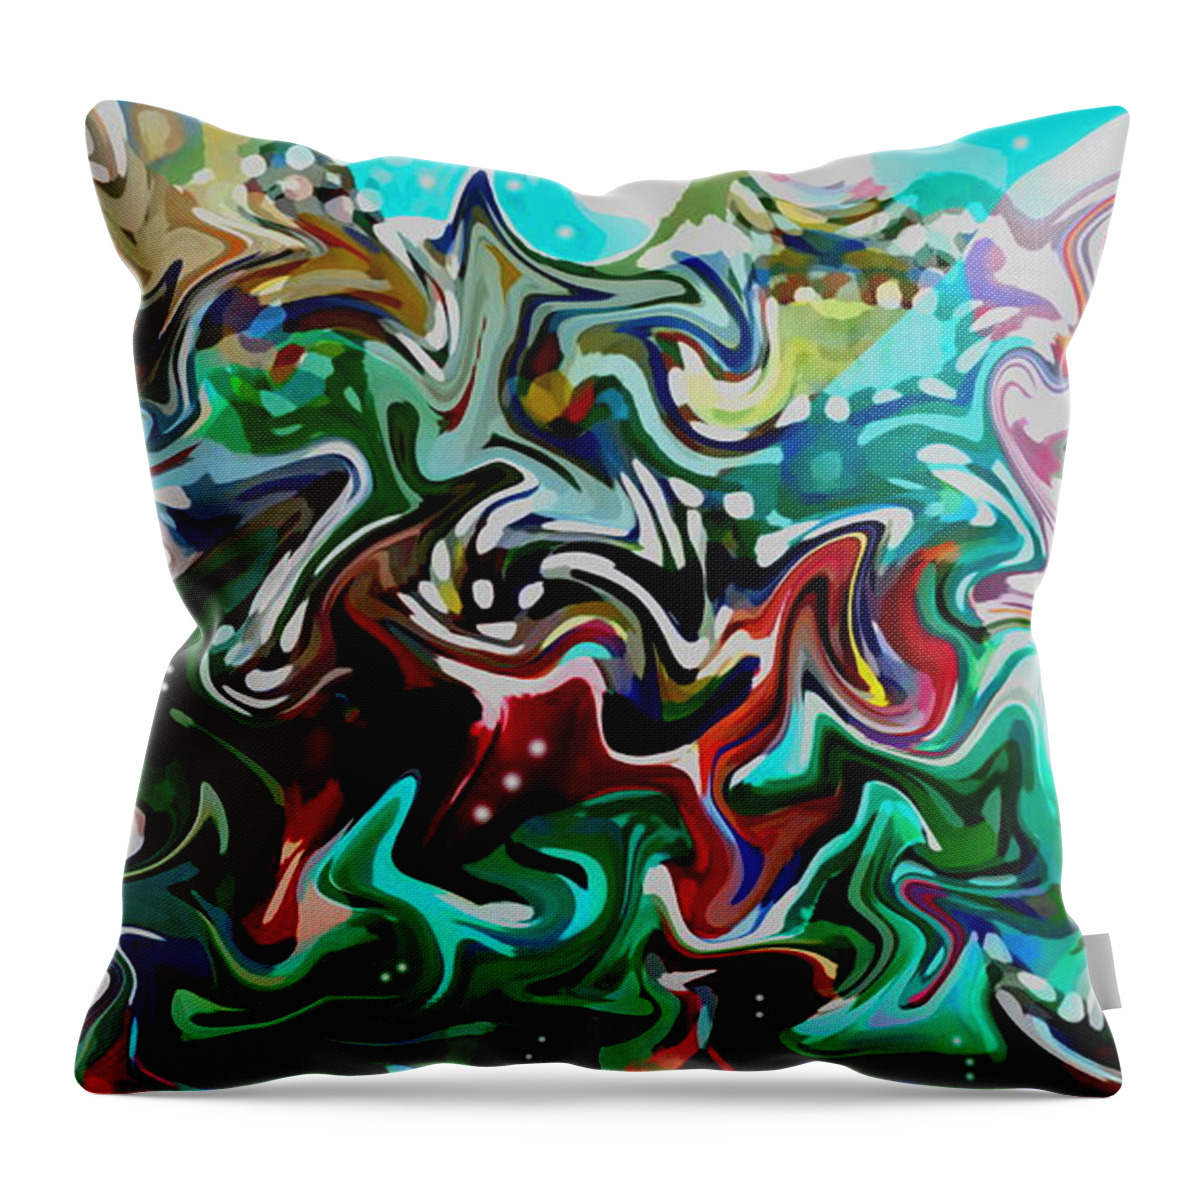 Abstract Throw Pillow featuring the mixed media Shaken Not Stirred by Shelli Fitzpatrick